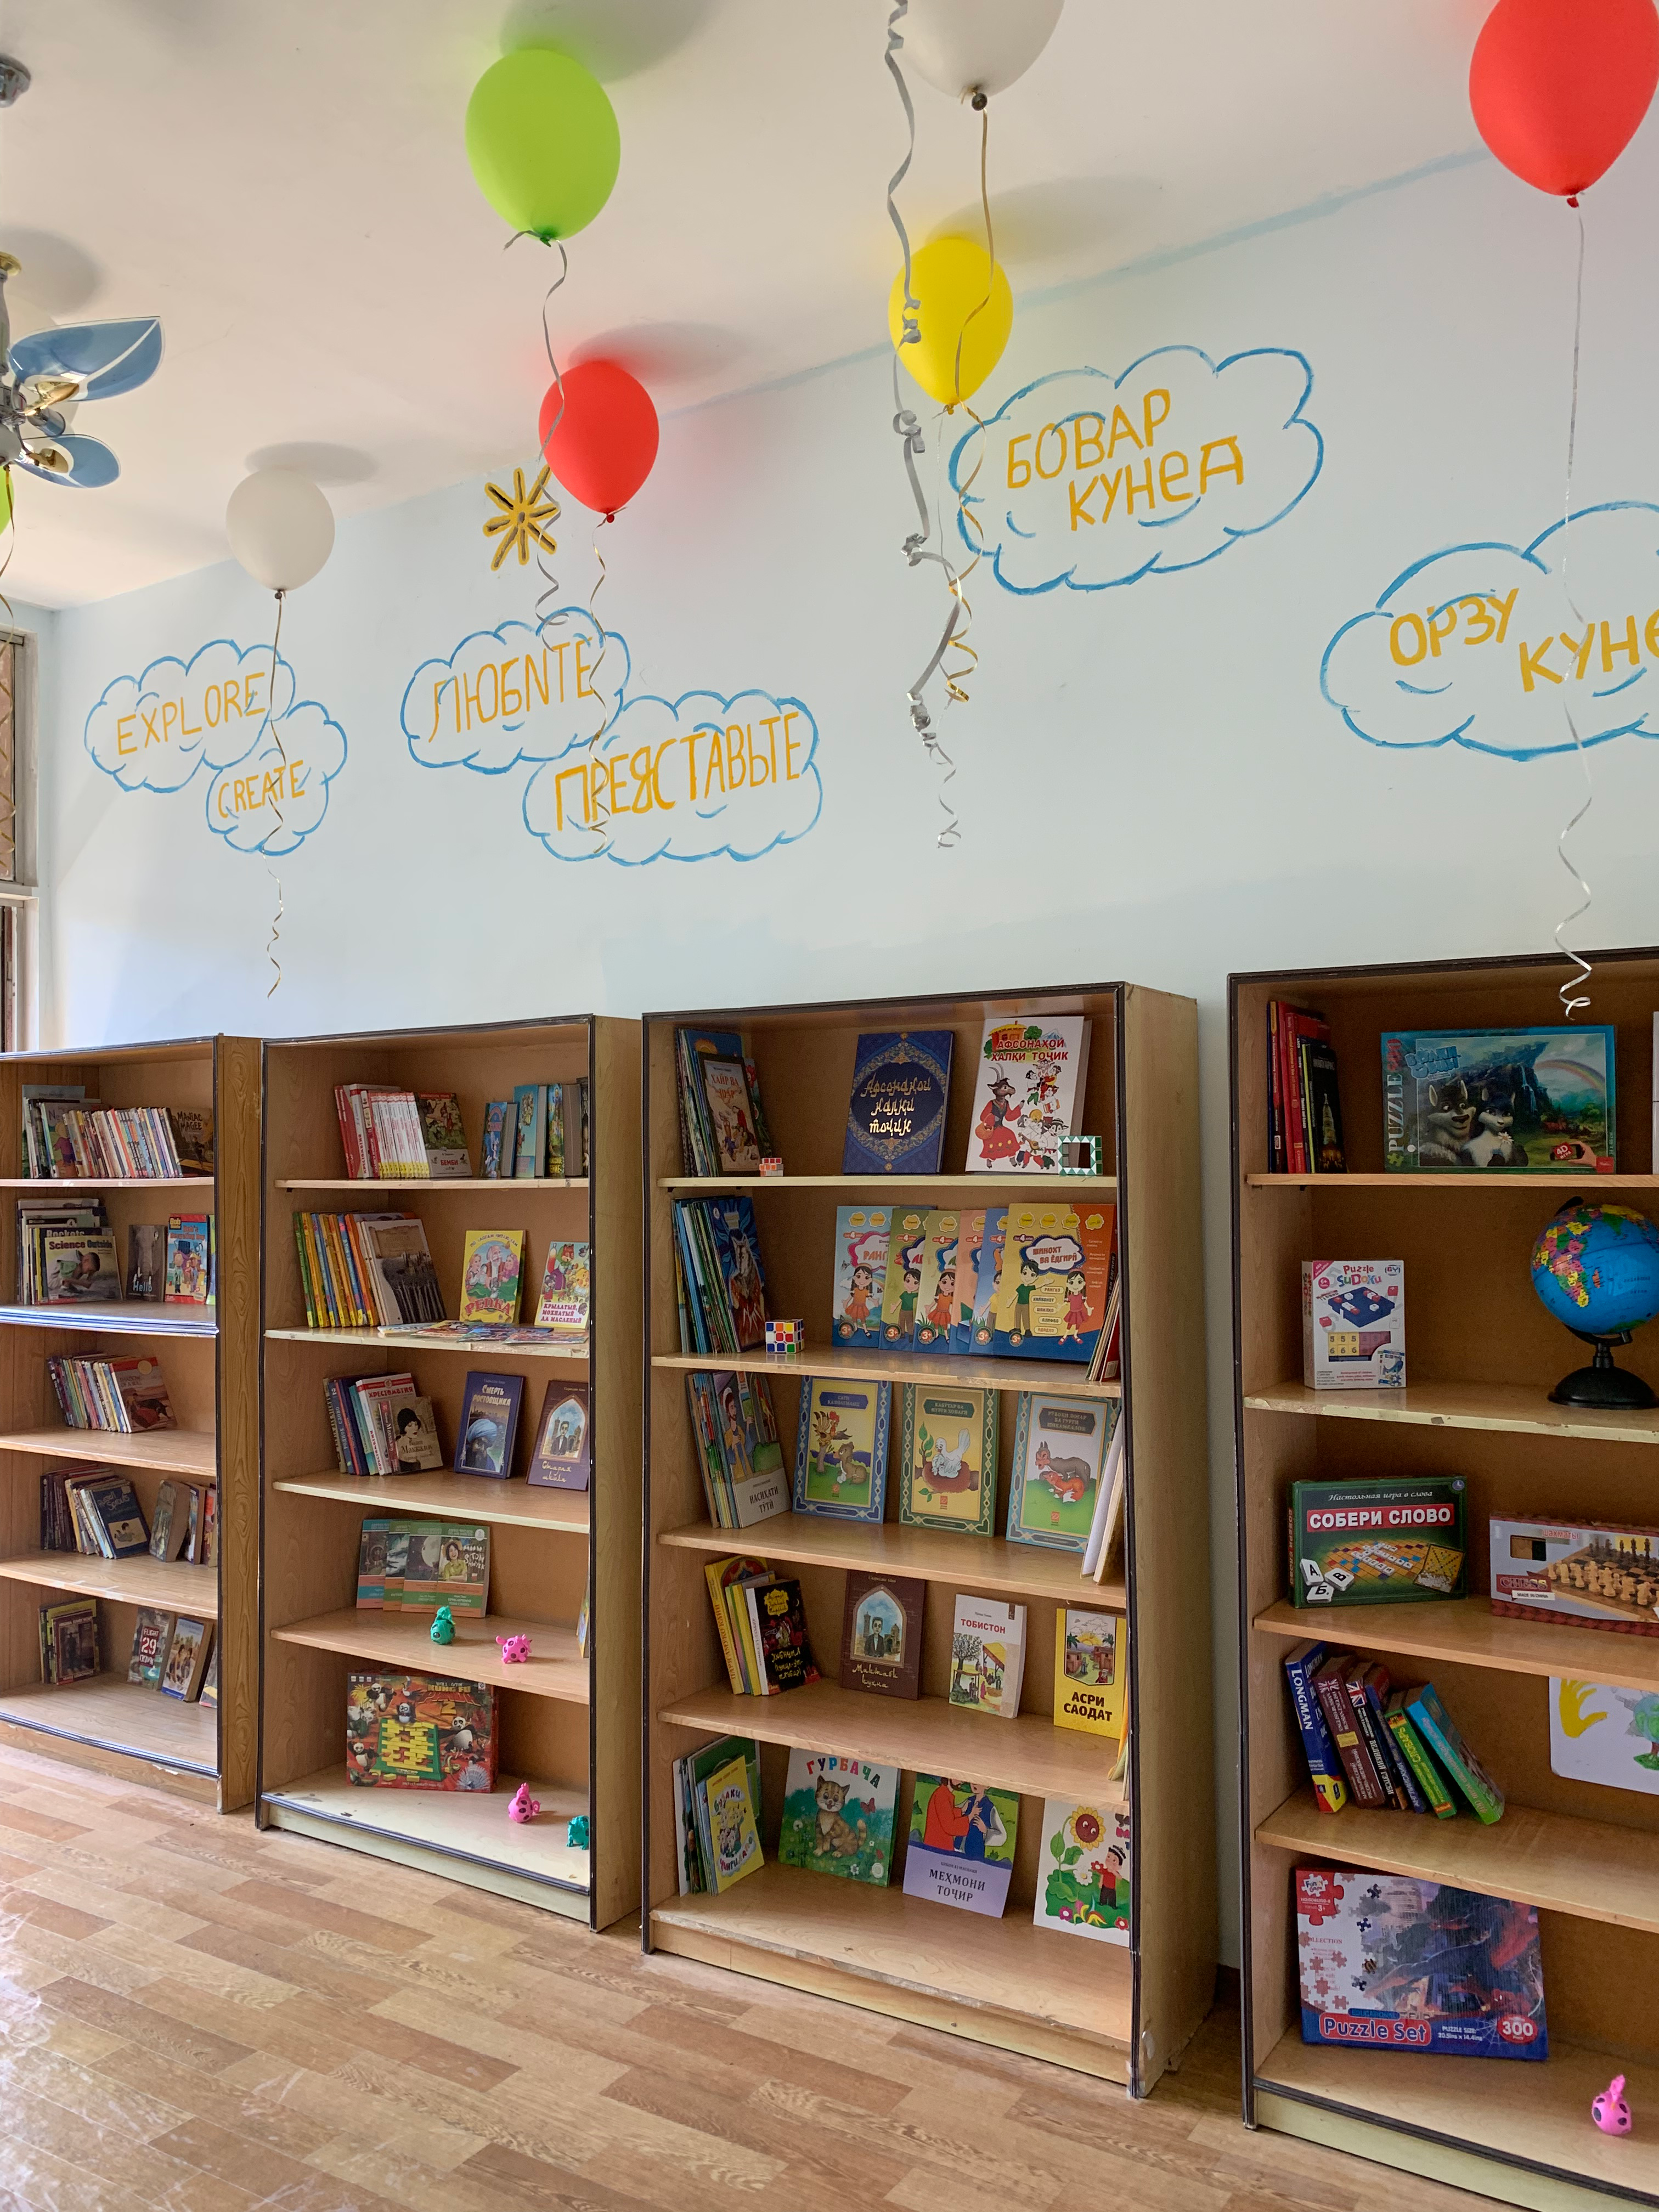 The finished library, with painted murals, books on shelves, and balloons hanging